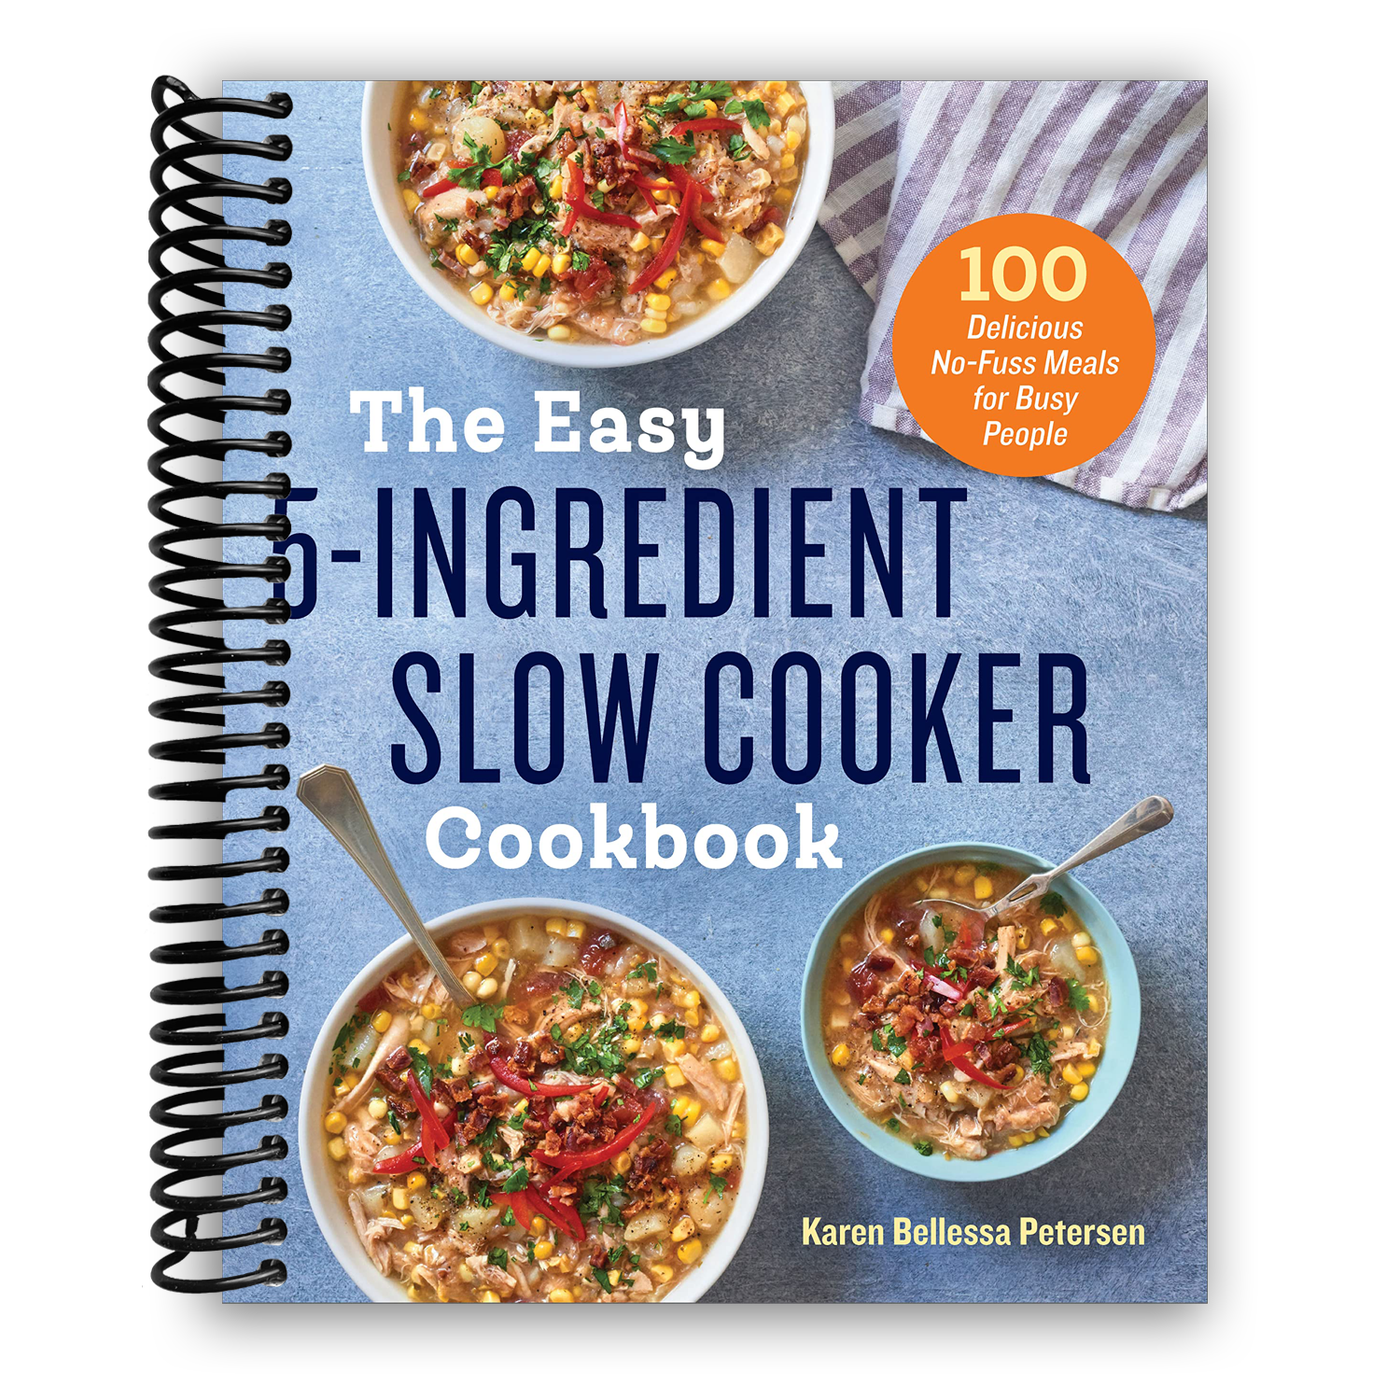 The Easy 5-Ingredient Slow Cooker Cookbook: 100 Delicious No-Fuss Meals for Busy People (Spiral Bound)